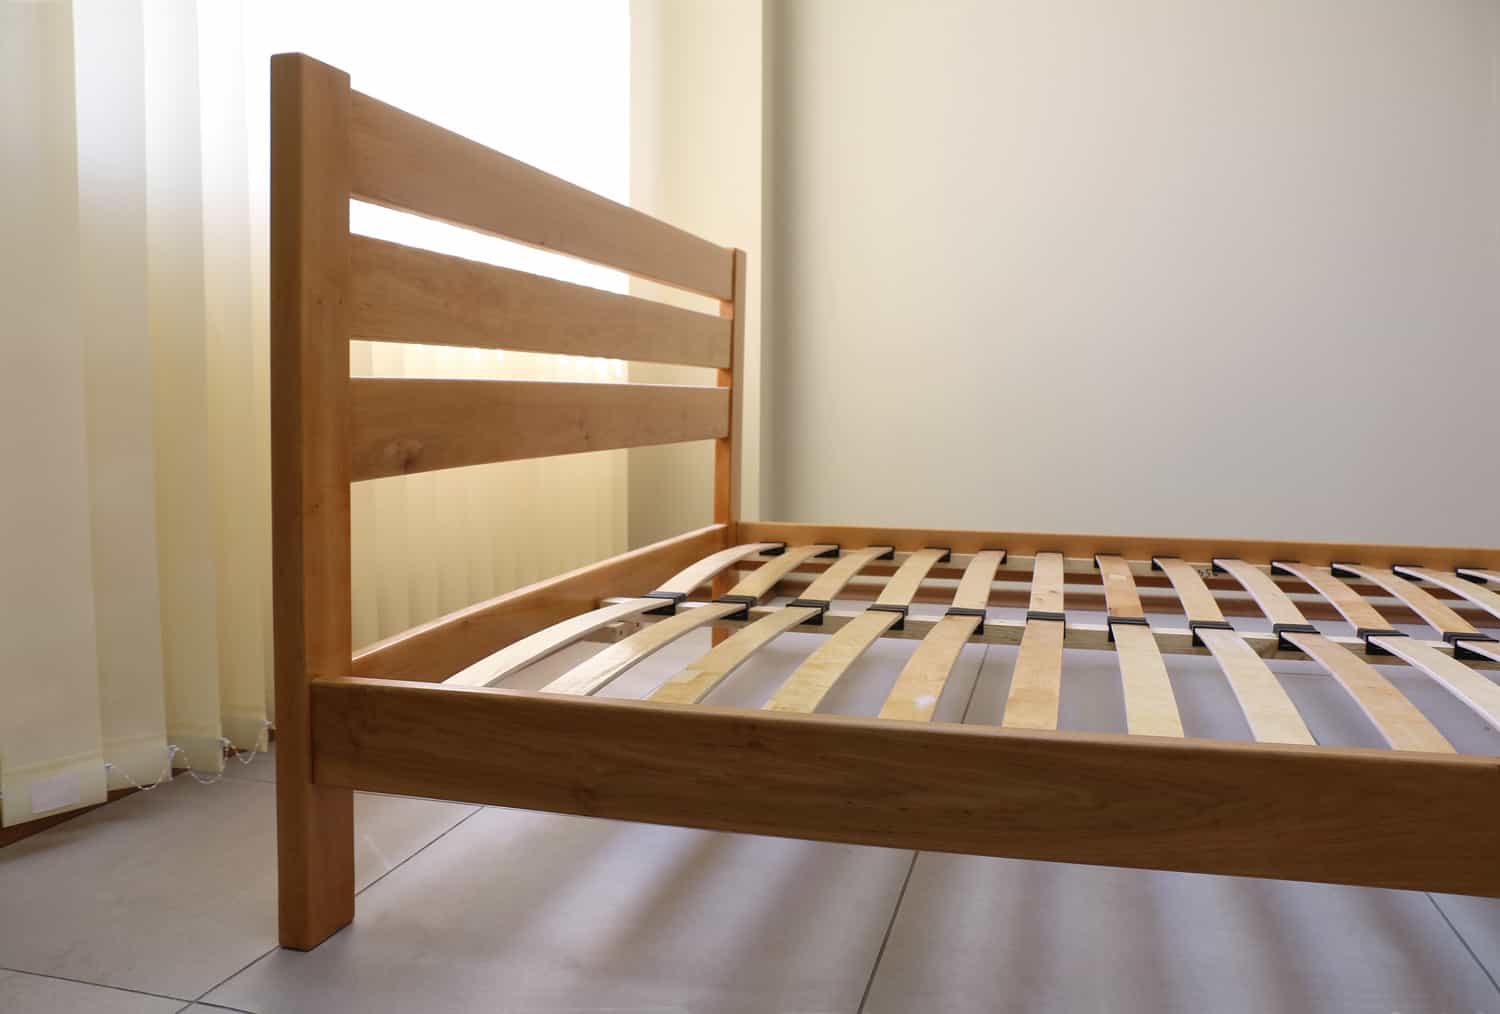 frame of a simple lacquered bed made of wood with slats